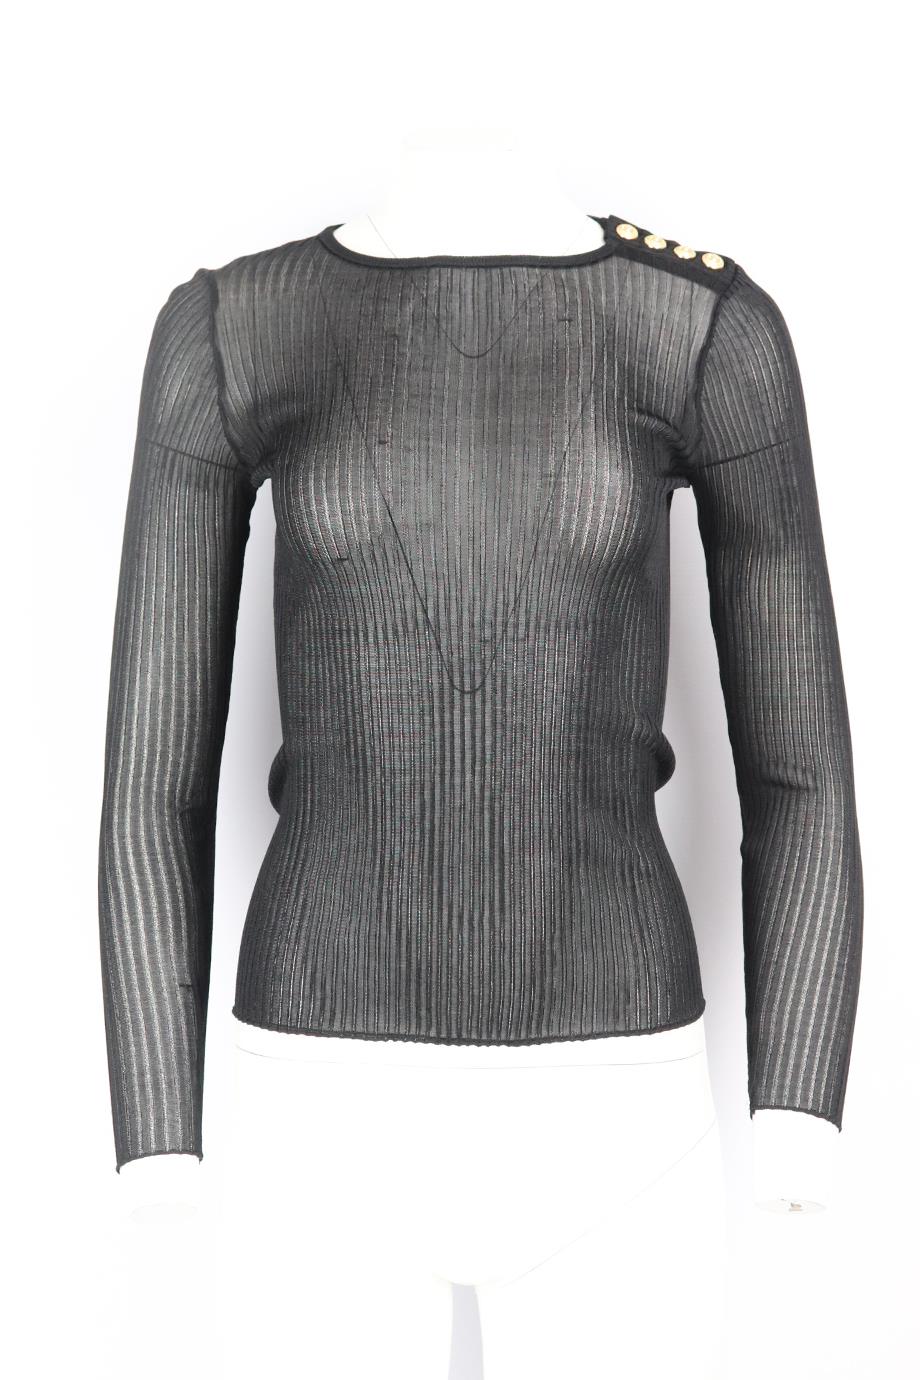 BALMAIN BUTTON EMBELLISHED RIBBED KNIT TOP XSMALL